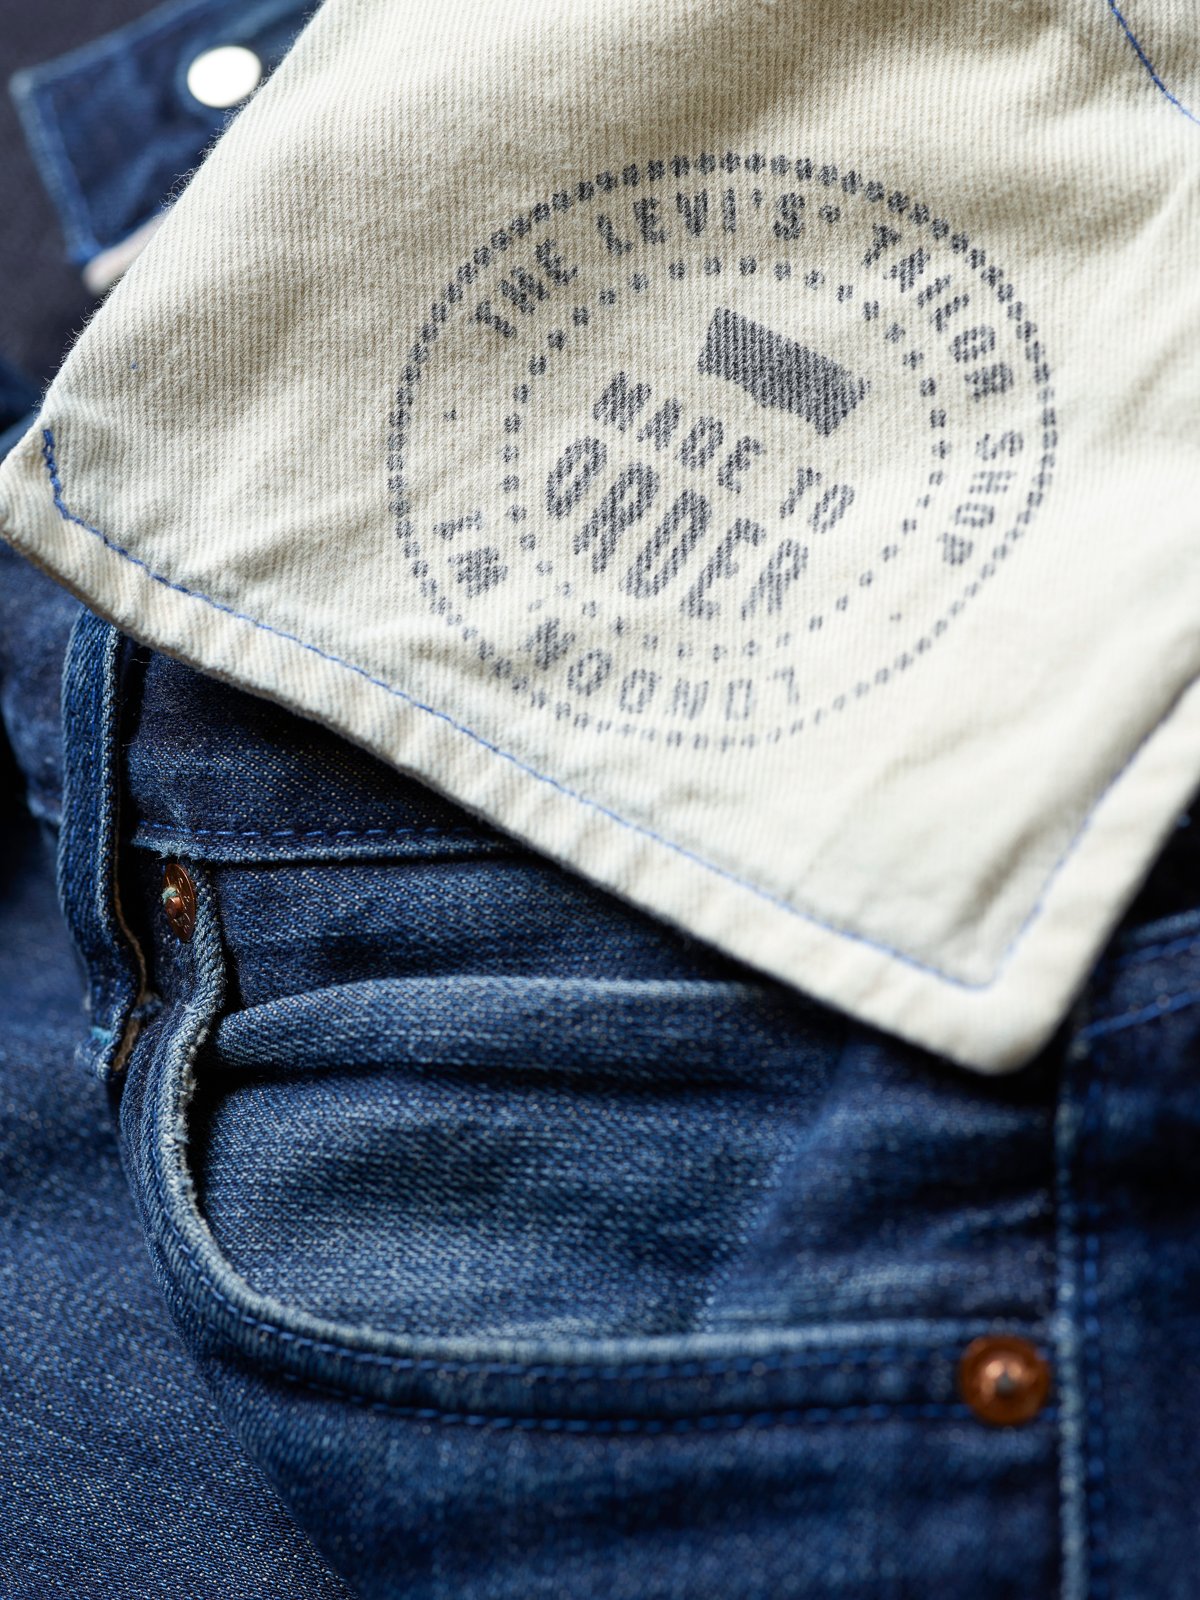 Levi’s bespoke jeans – Update and 501st pair – Permanent Style